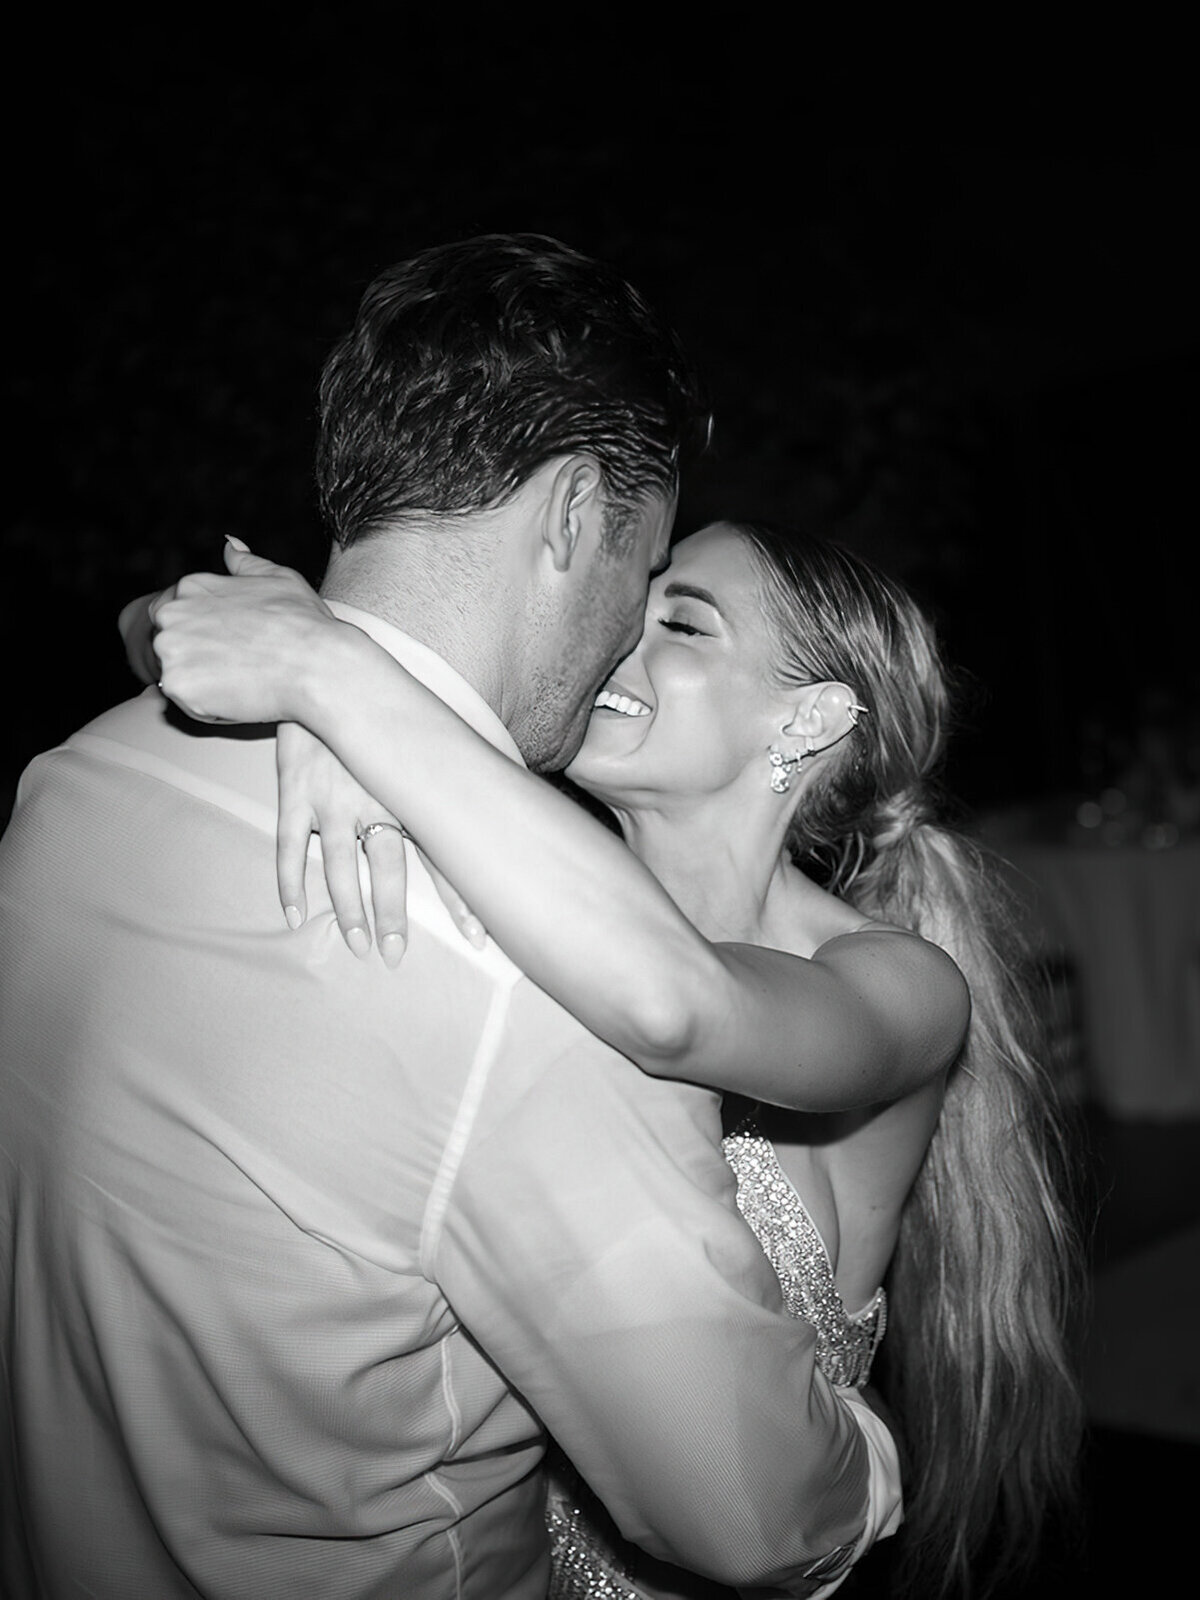 black and white reception dancing couples picture bride and groom atlanta and charleston fine art wedding photographer, film photographs by destination photography Hannah Forsberg